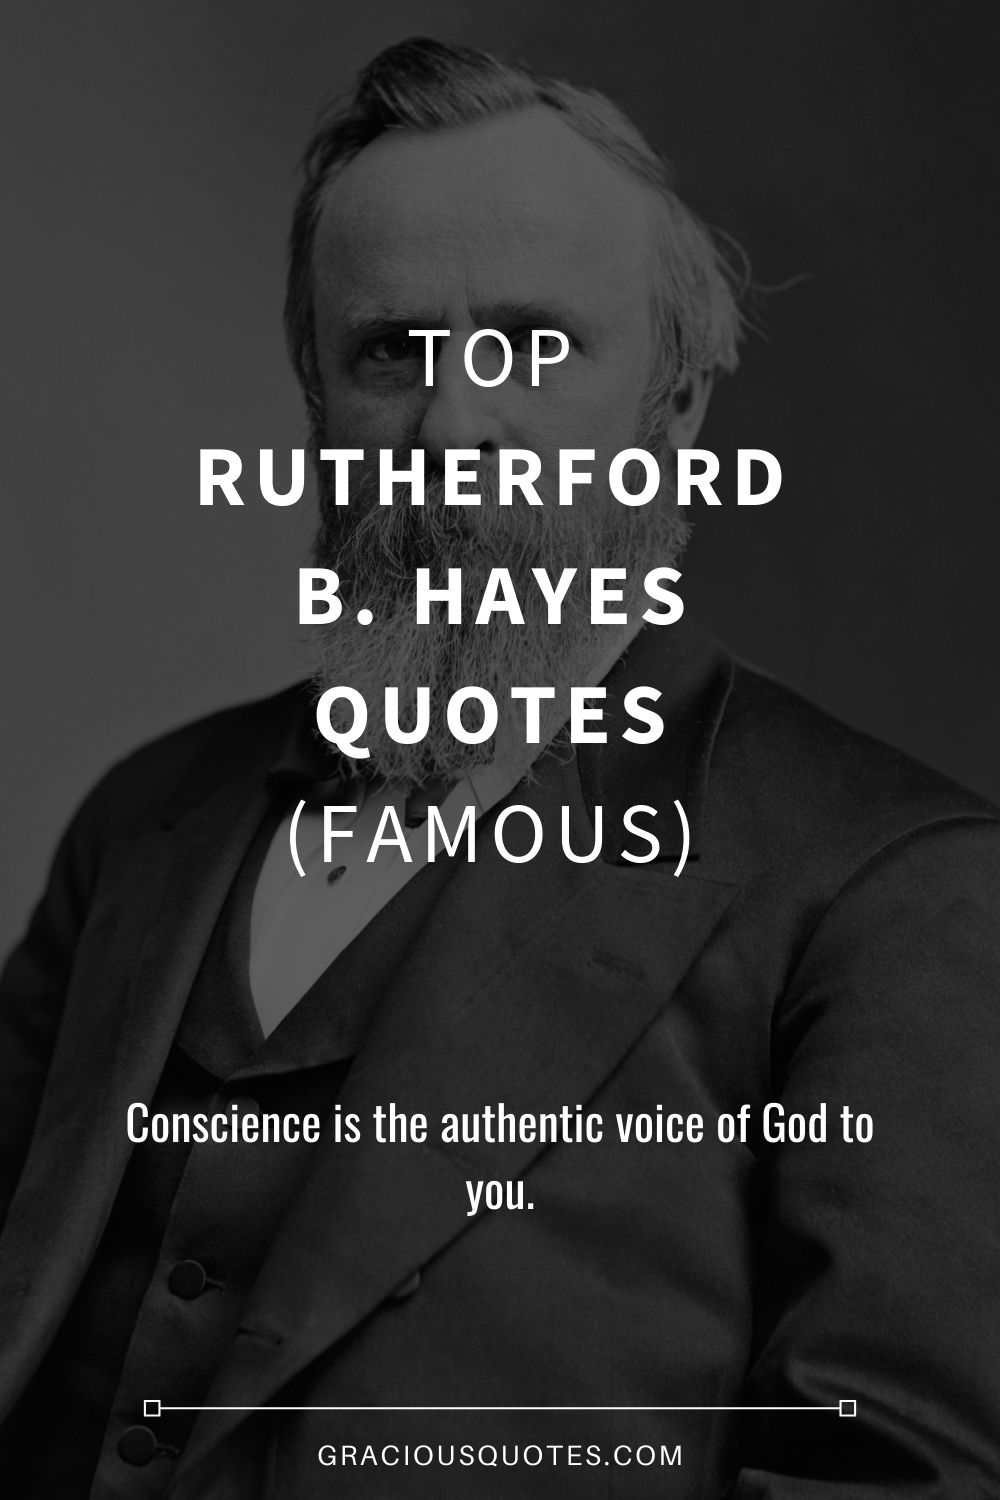 Top Rutherford B. Hayes Quotes (FAMOUS) - Gracious Quotes